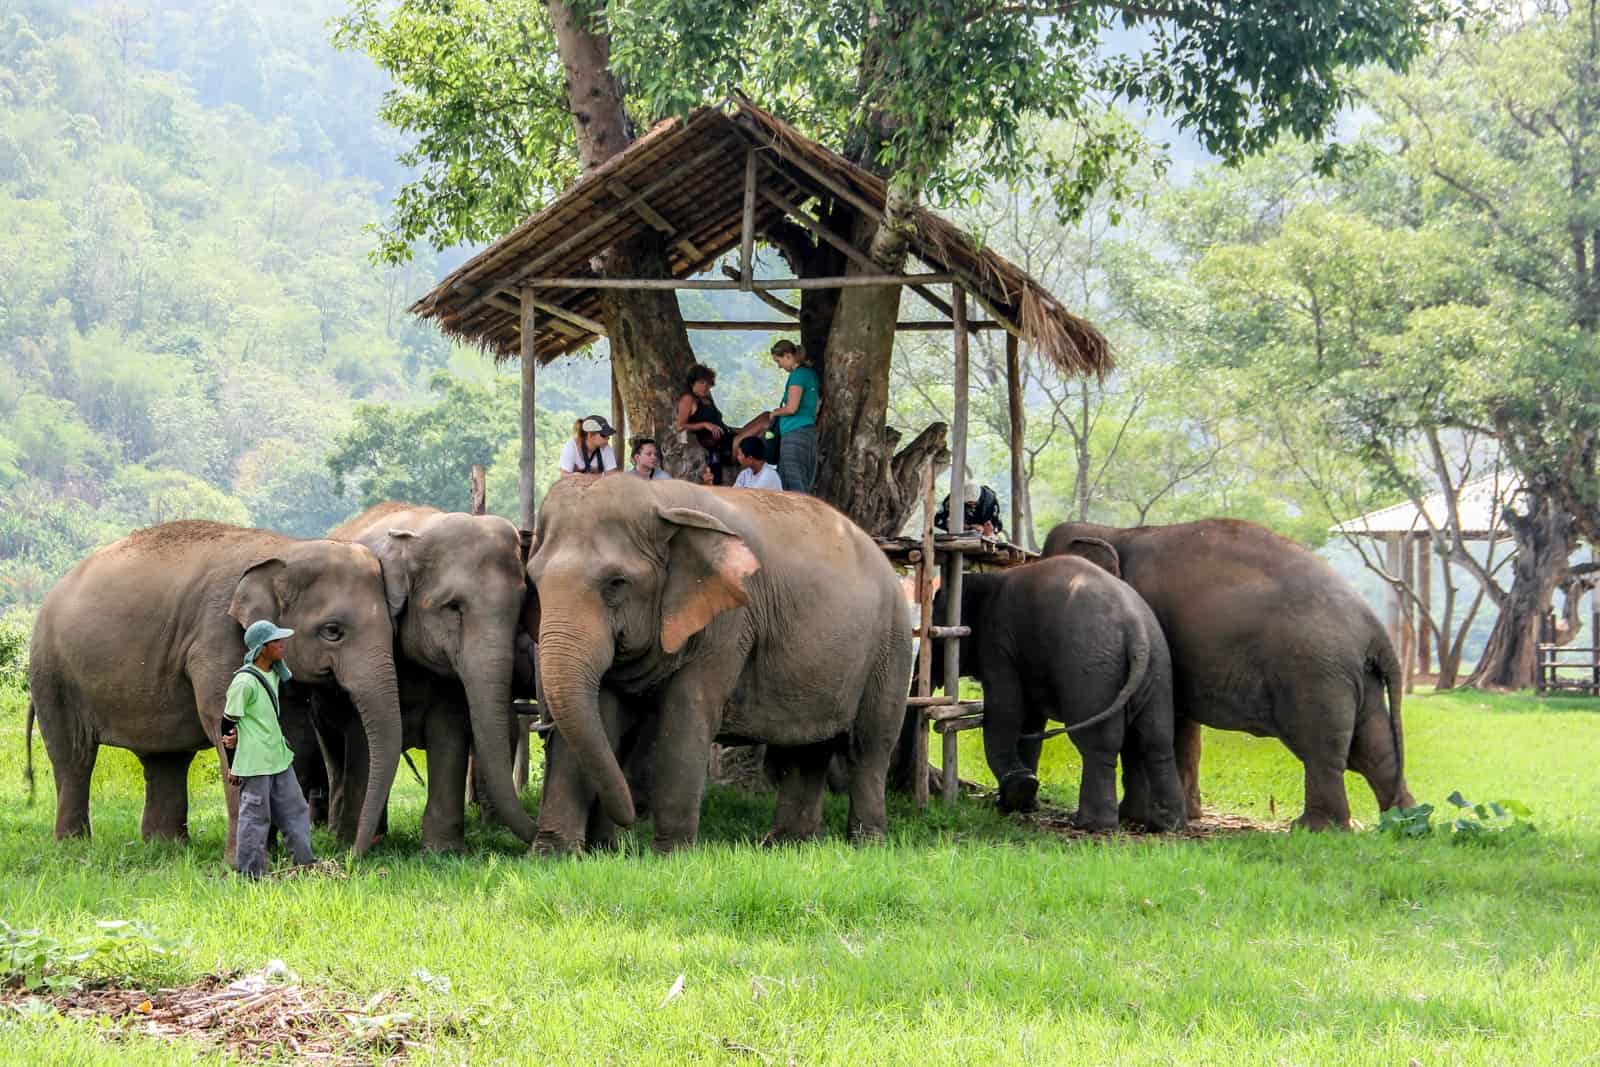 A small group of tourists view elephants from a wooden platform at the Elephant Nature Park in Chiang Mai, Thailand.